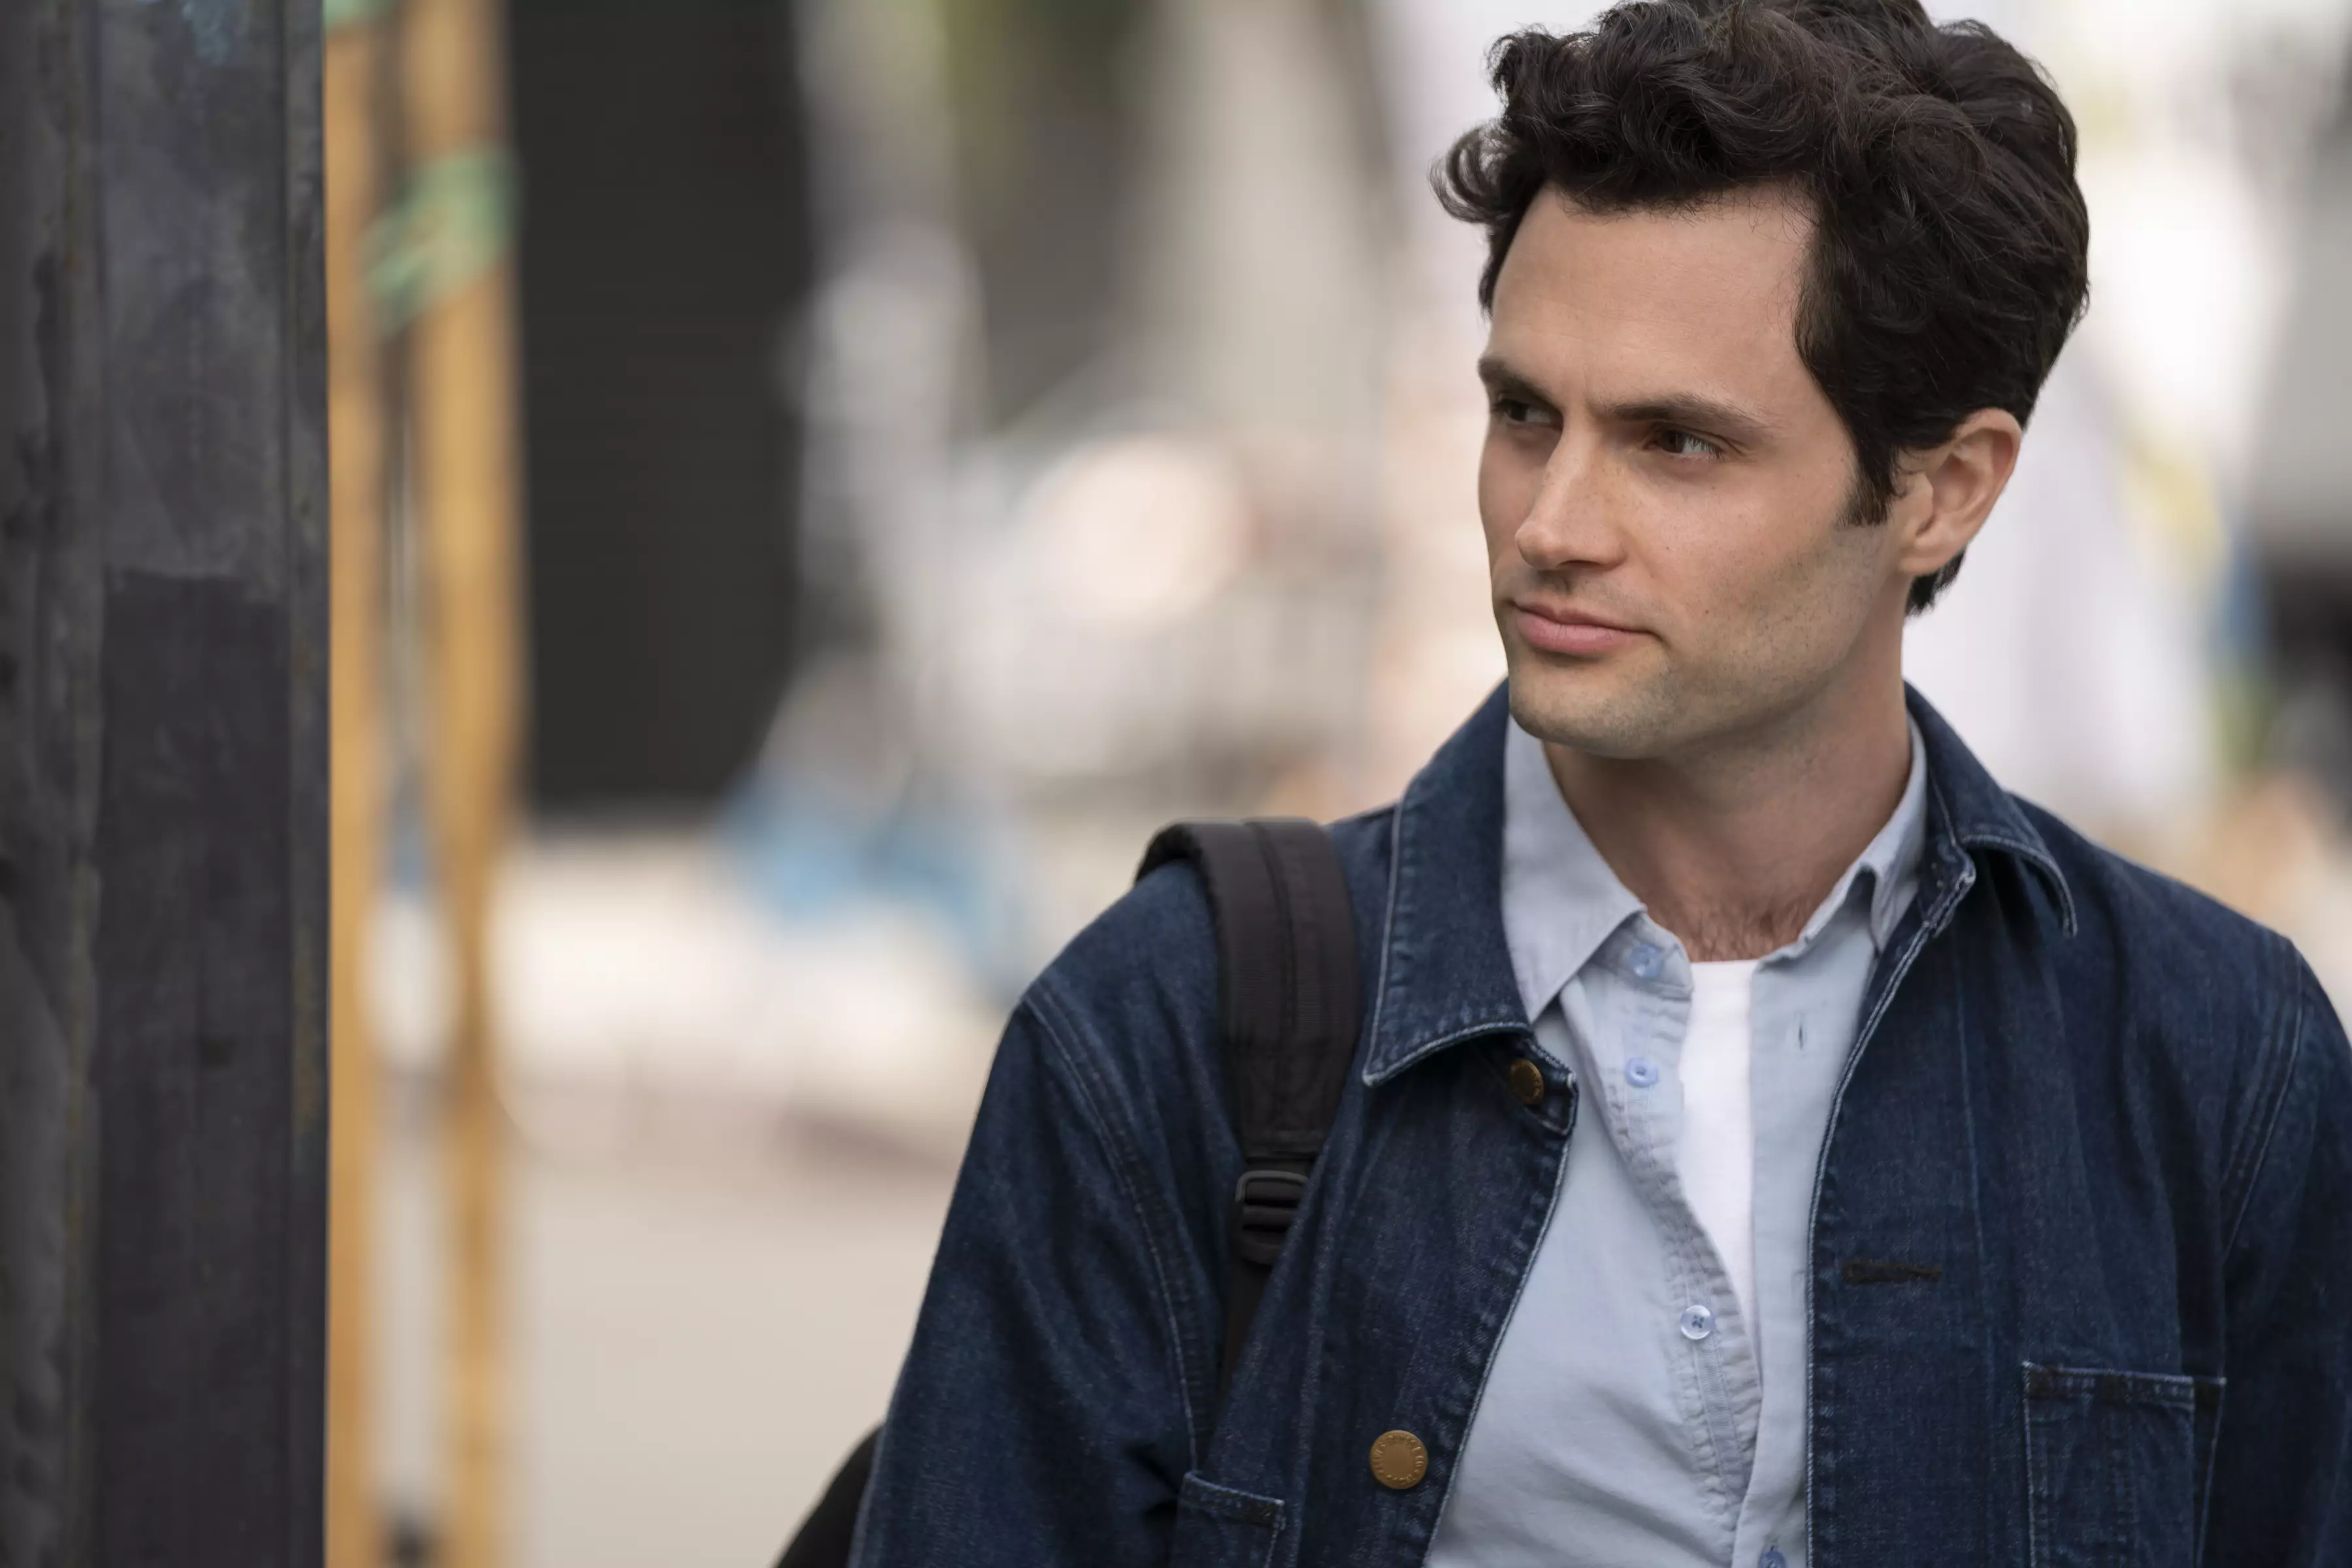 Penn Badgley accidentally confirmed that there will be a third series (